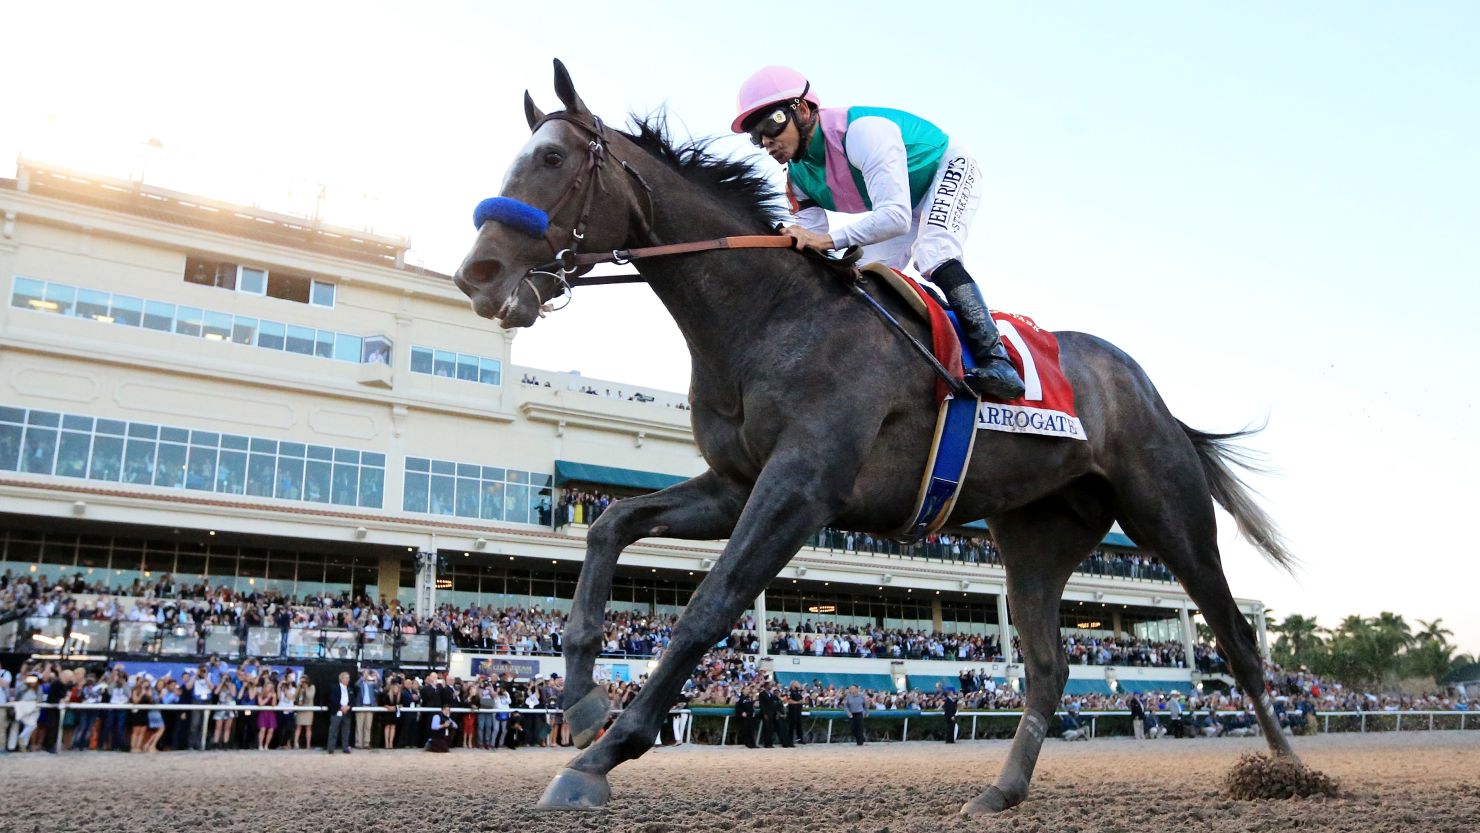 Arrogate won the Pegasus World Cup and Dubai World Cup in 2017 to crown a glittering career. 